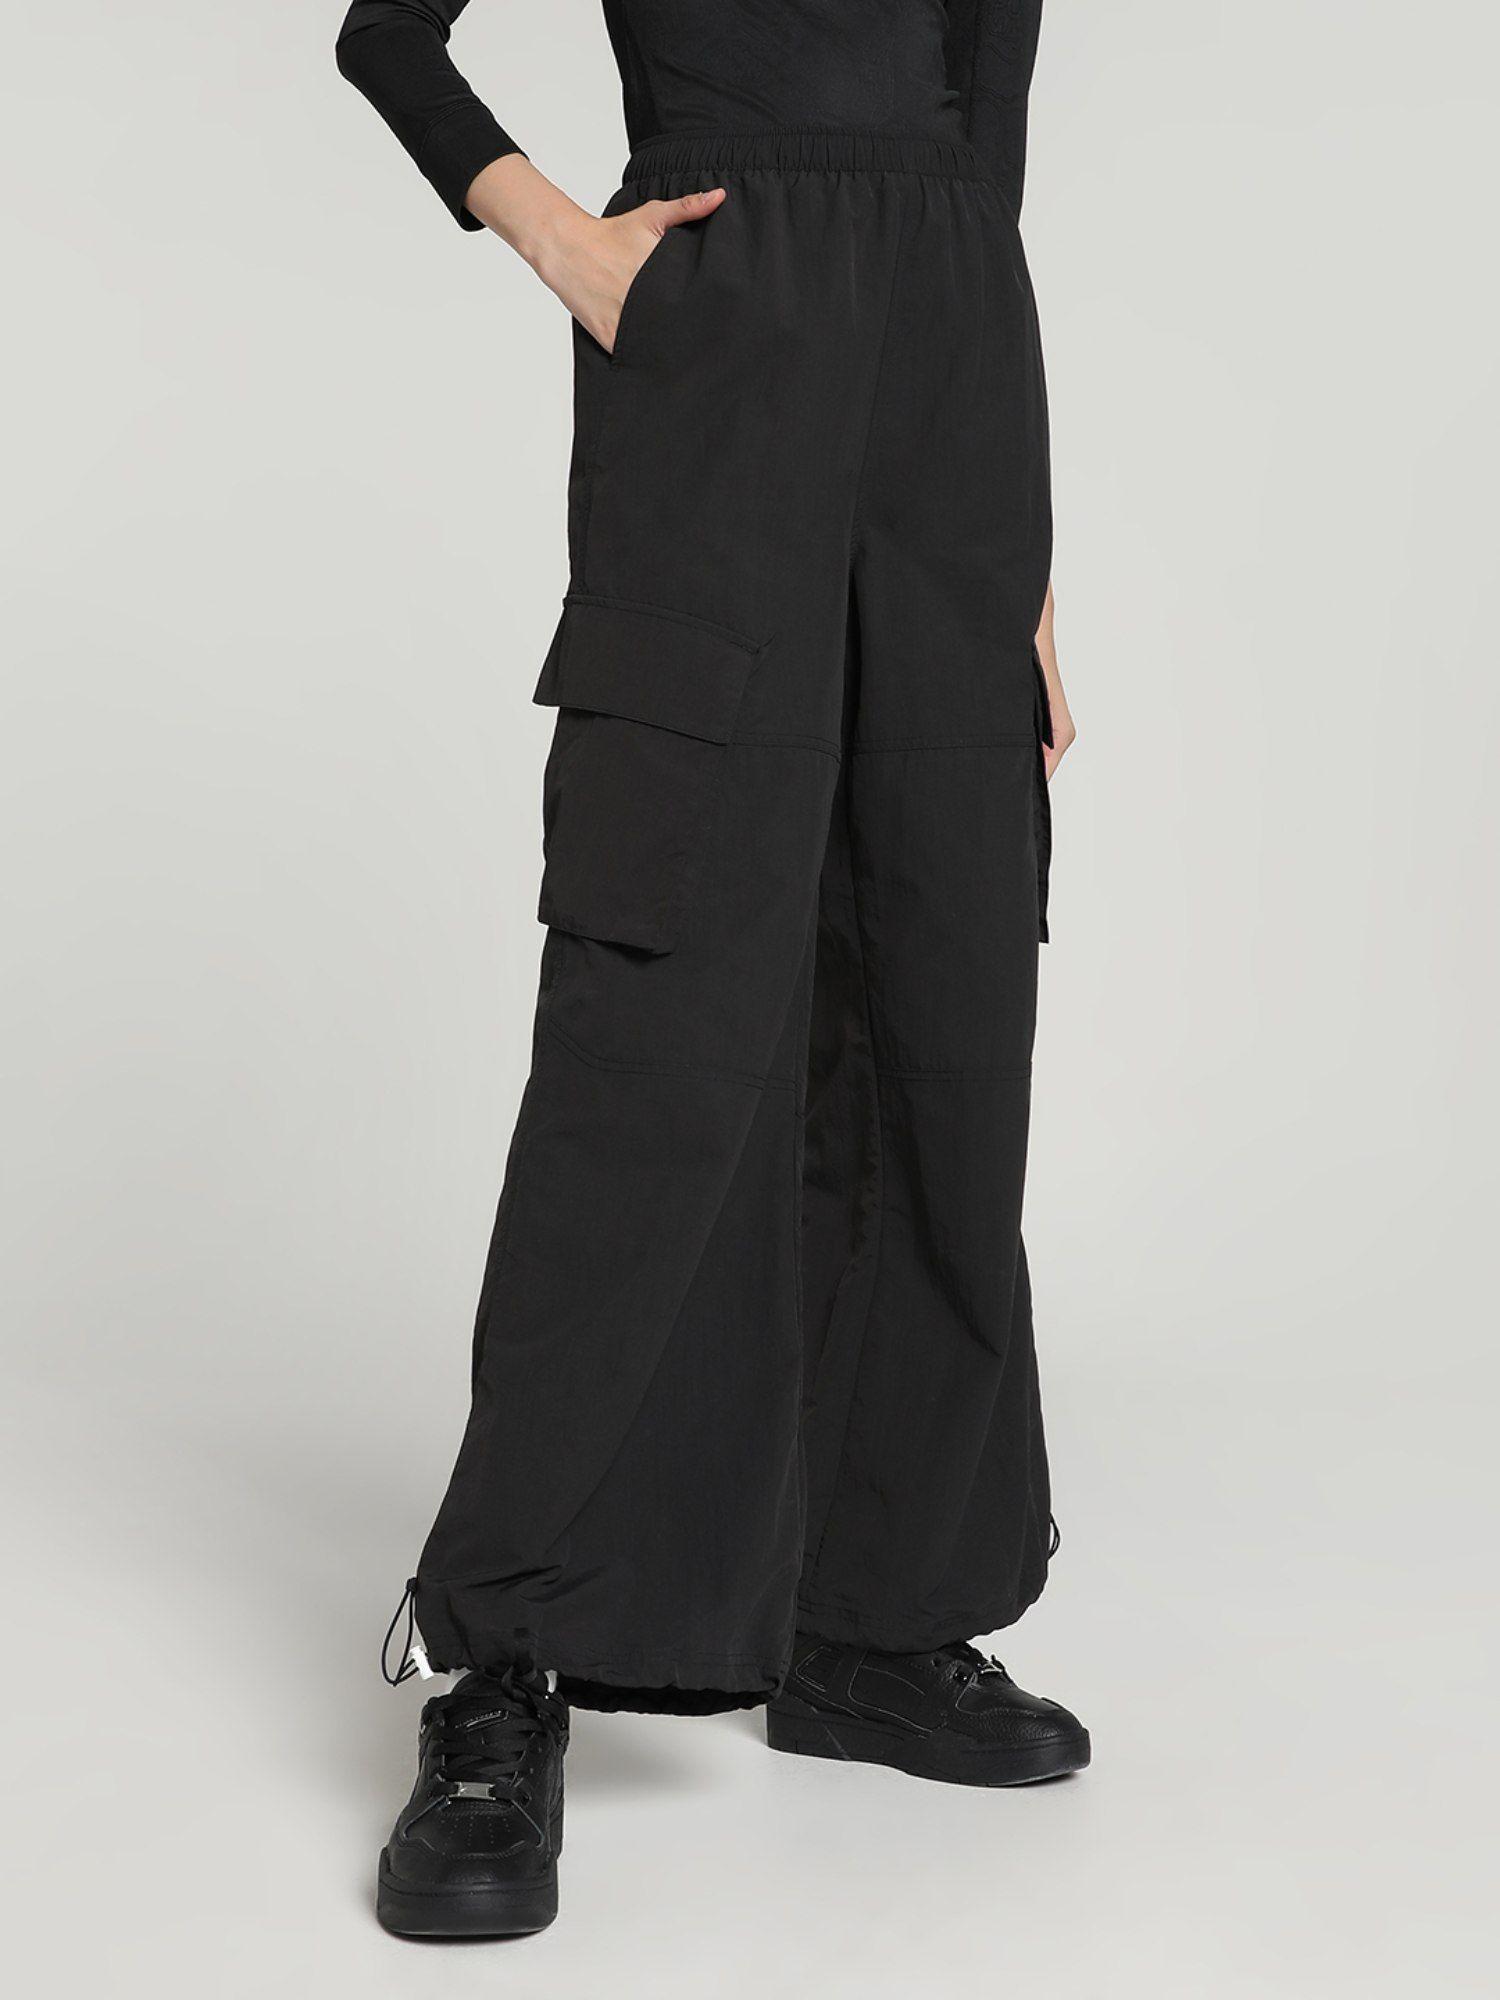 dare to relaxed women black sweatpants